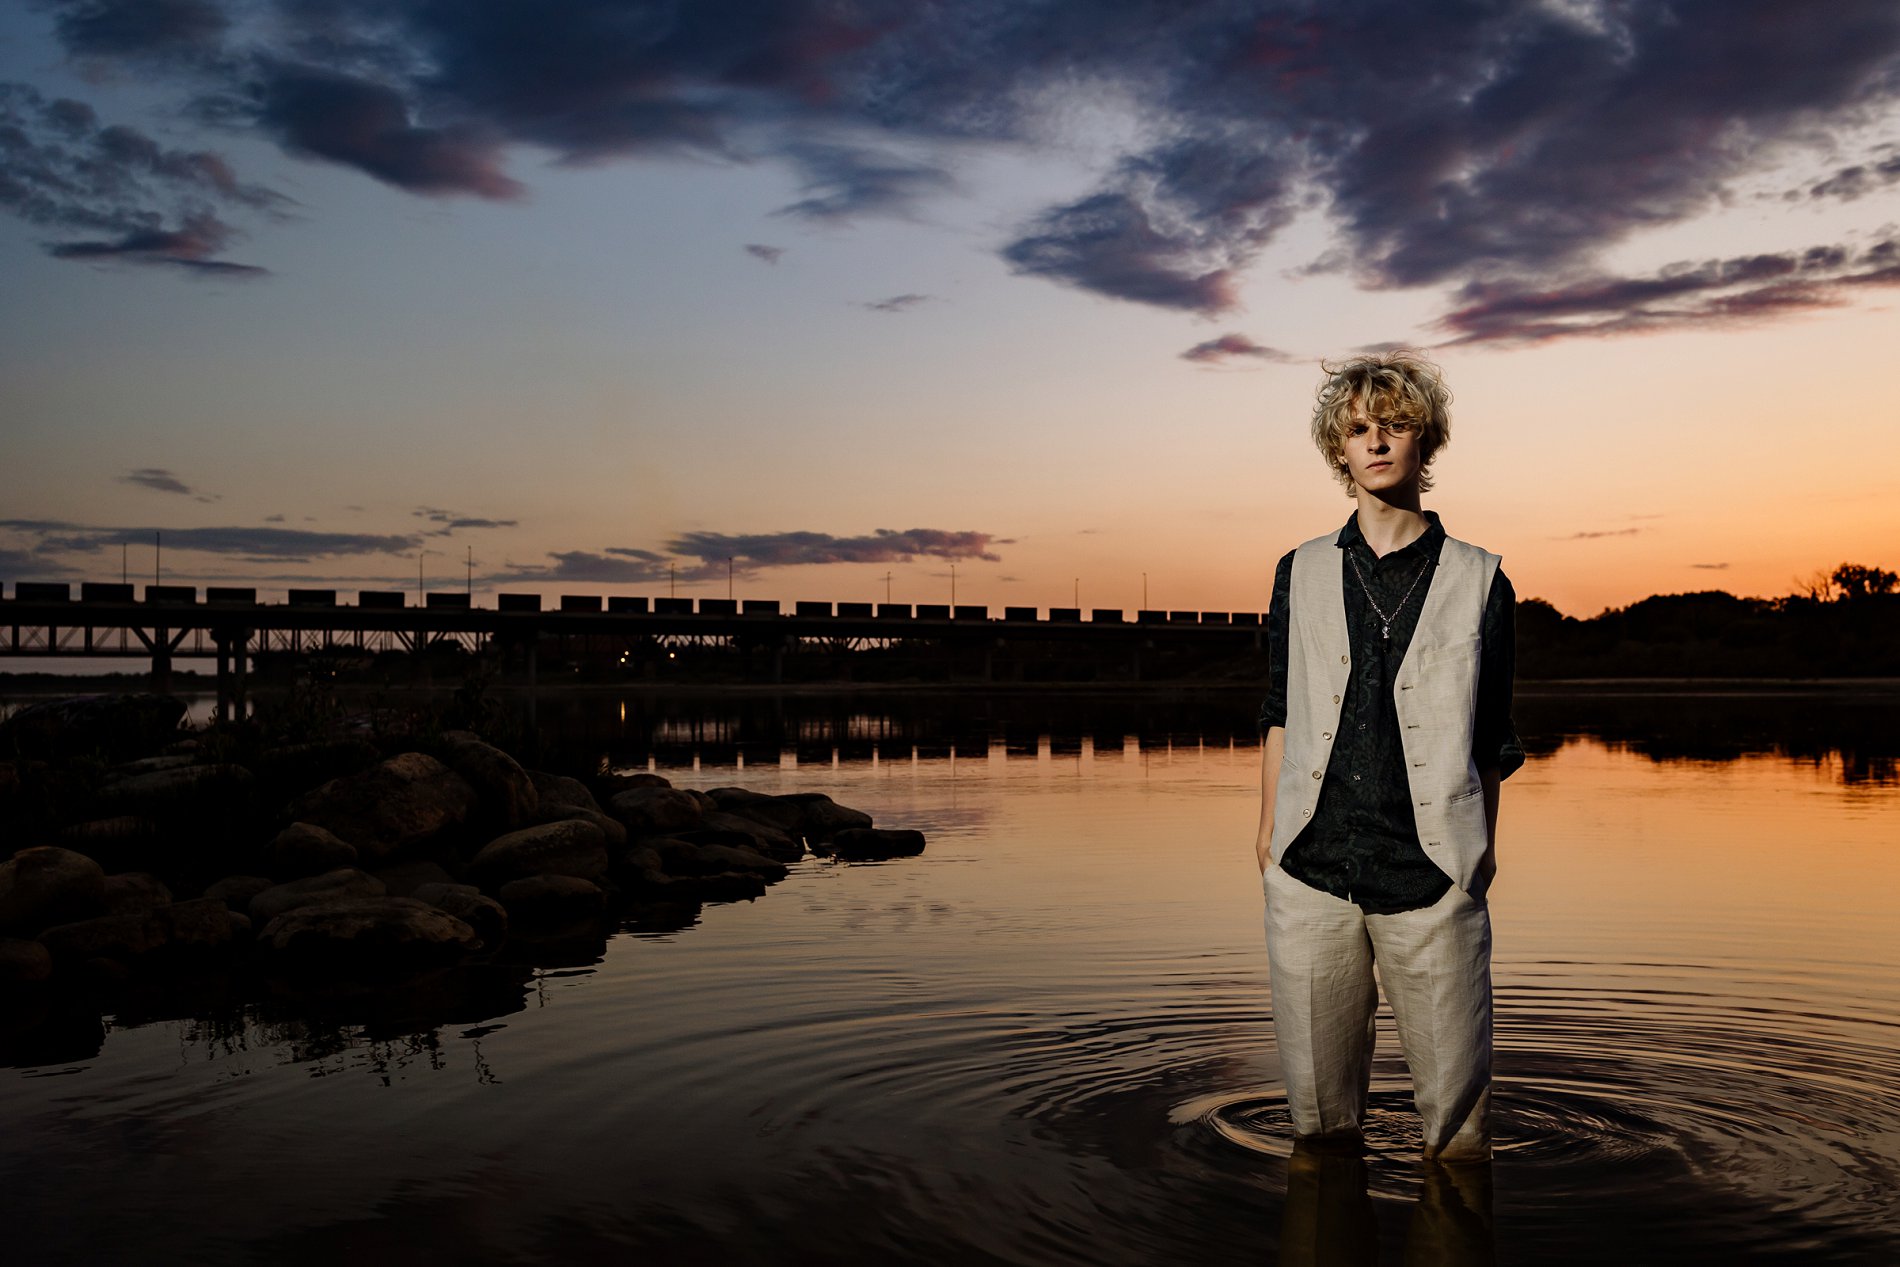 Saskatoon grad photography. A boy stands in the South Saskatchewan River at sunset as a train passes on the bridge in the background.